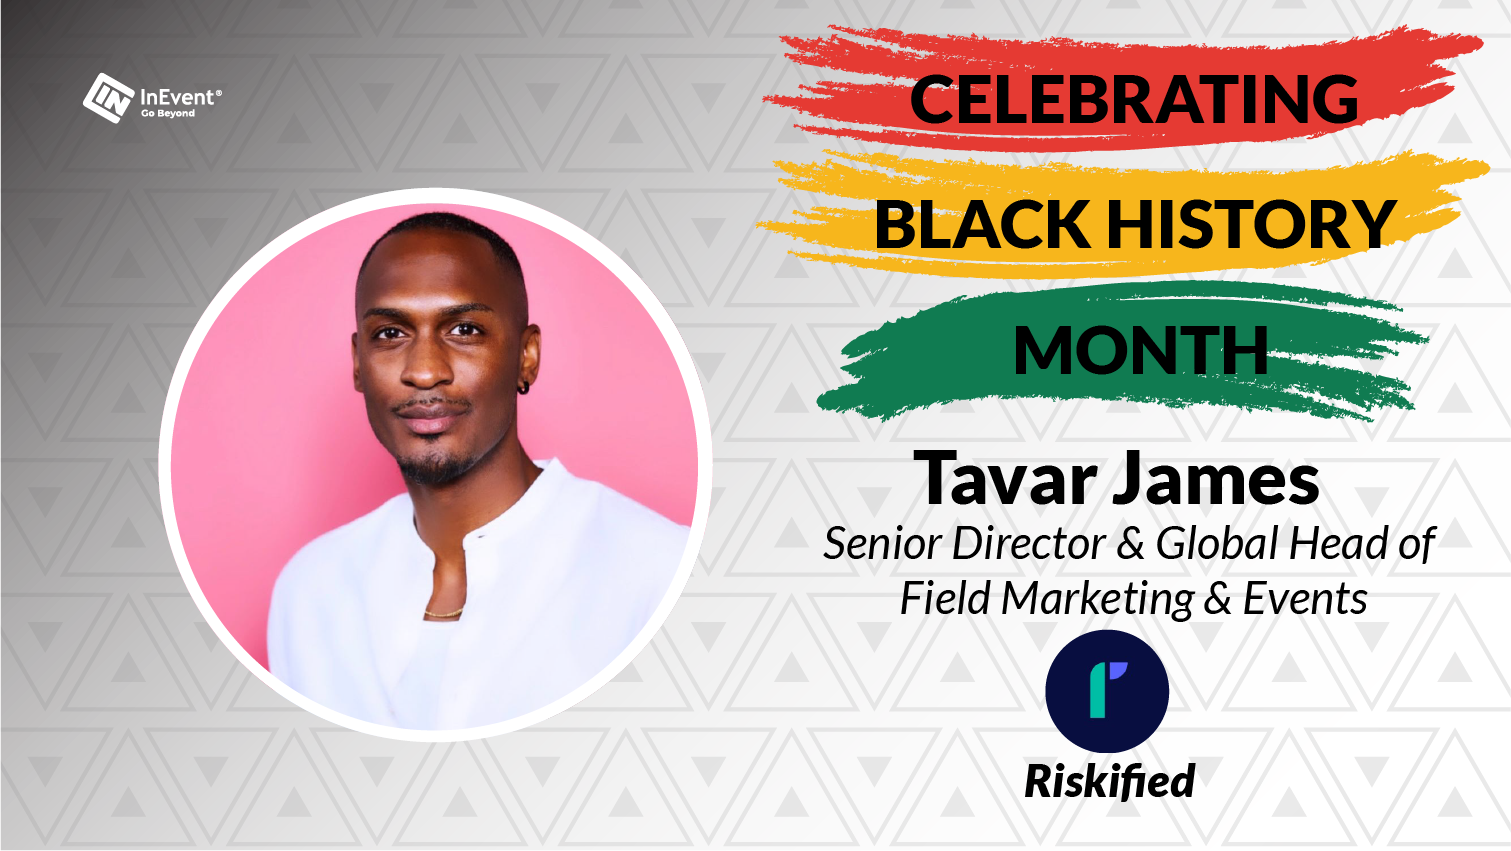 Meet our Top 25 Black Professionals in the Events Industry - Tavar James 